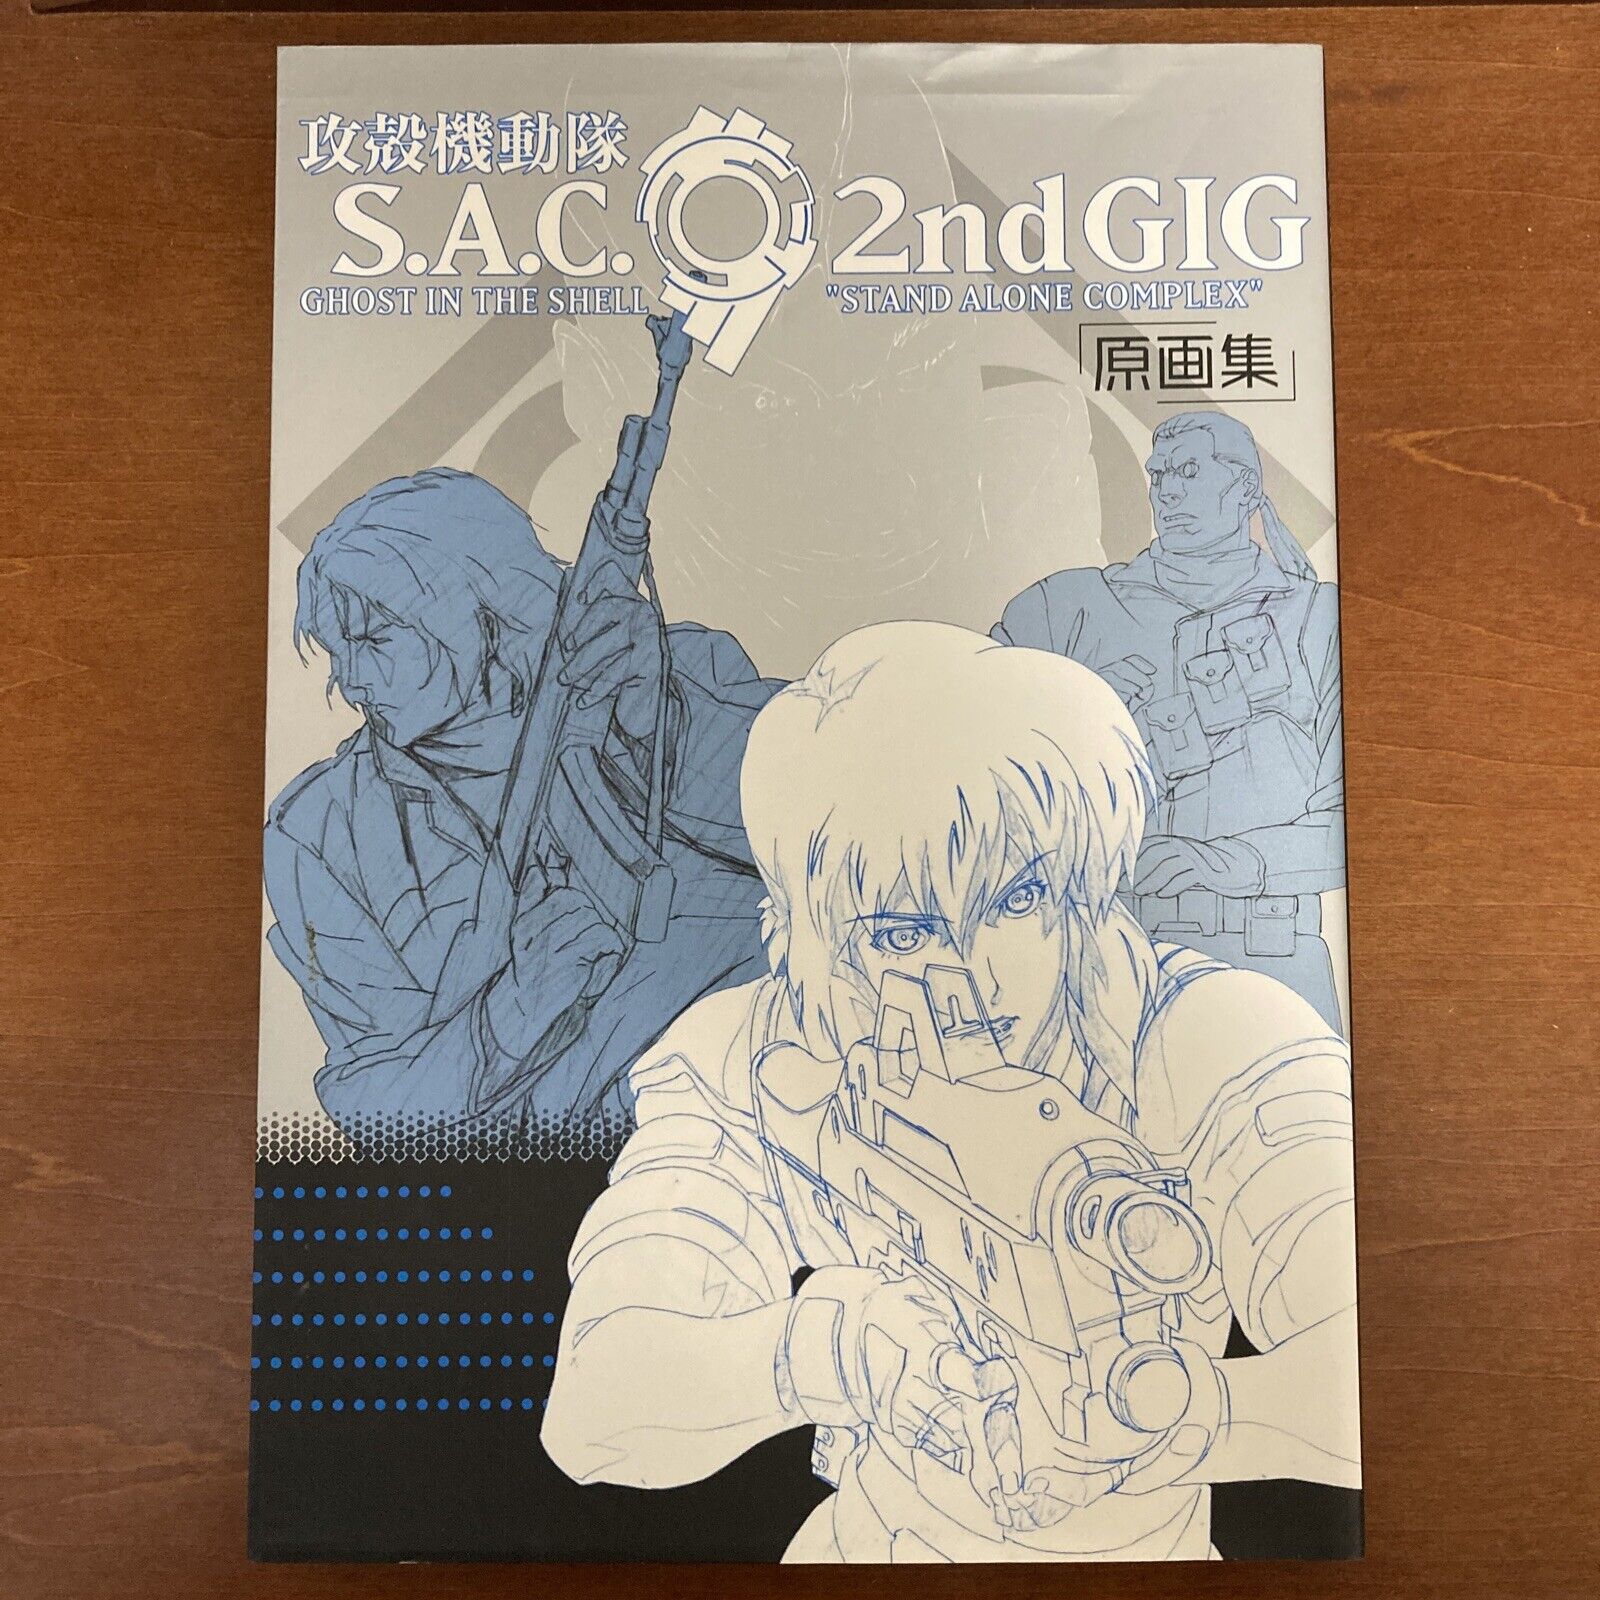 Ghost in the Shell S.A.C. 2nd GIG Art Book Illustration